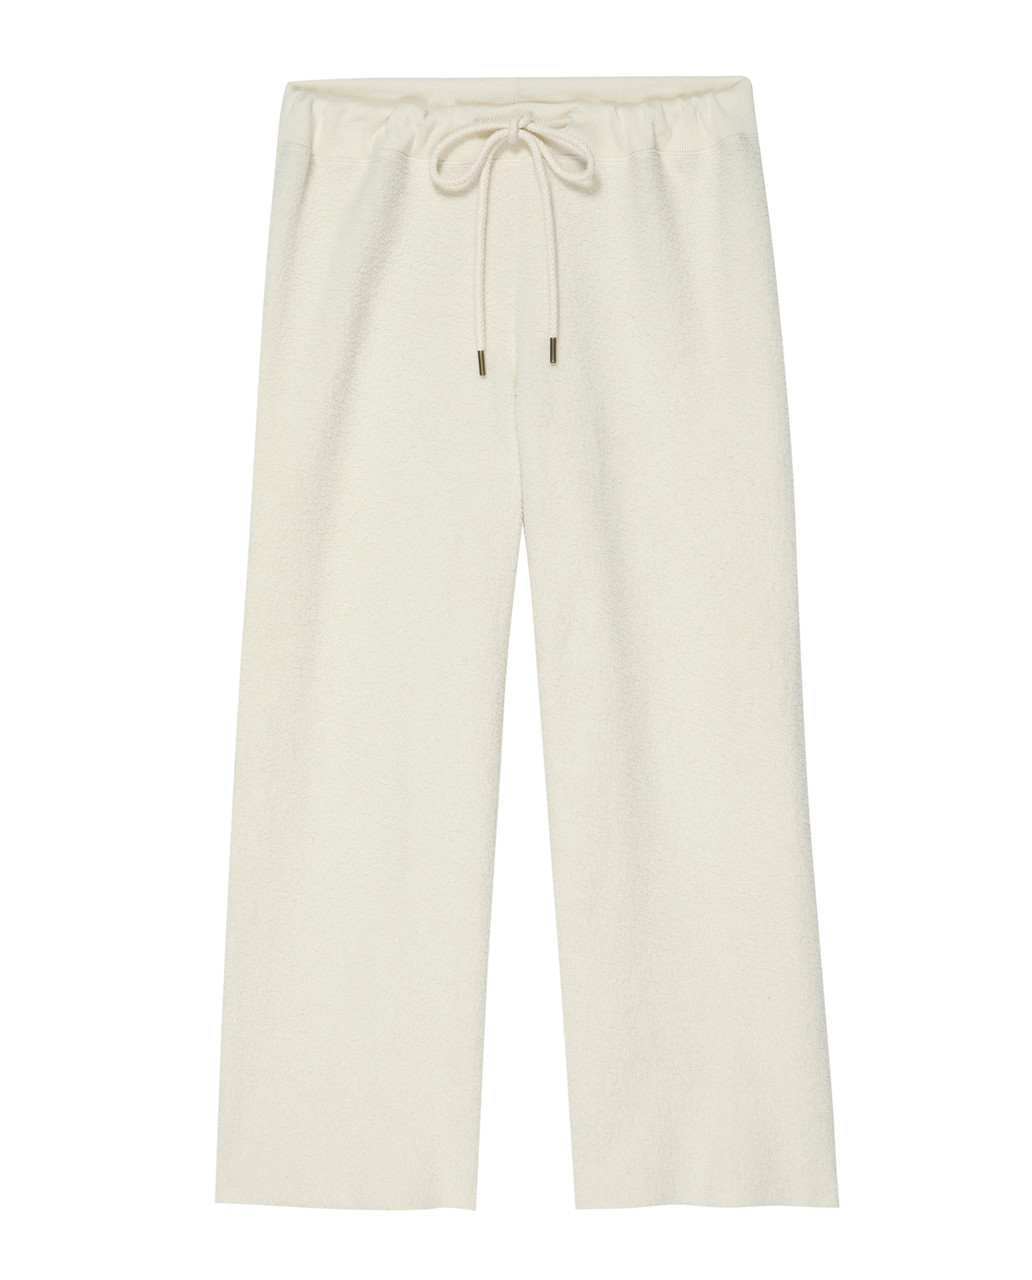 The Great Fleece Cropped Wide Leg Sweatpants, Washed White - Monkee's ...